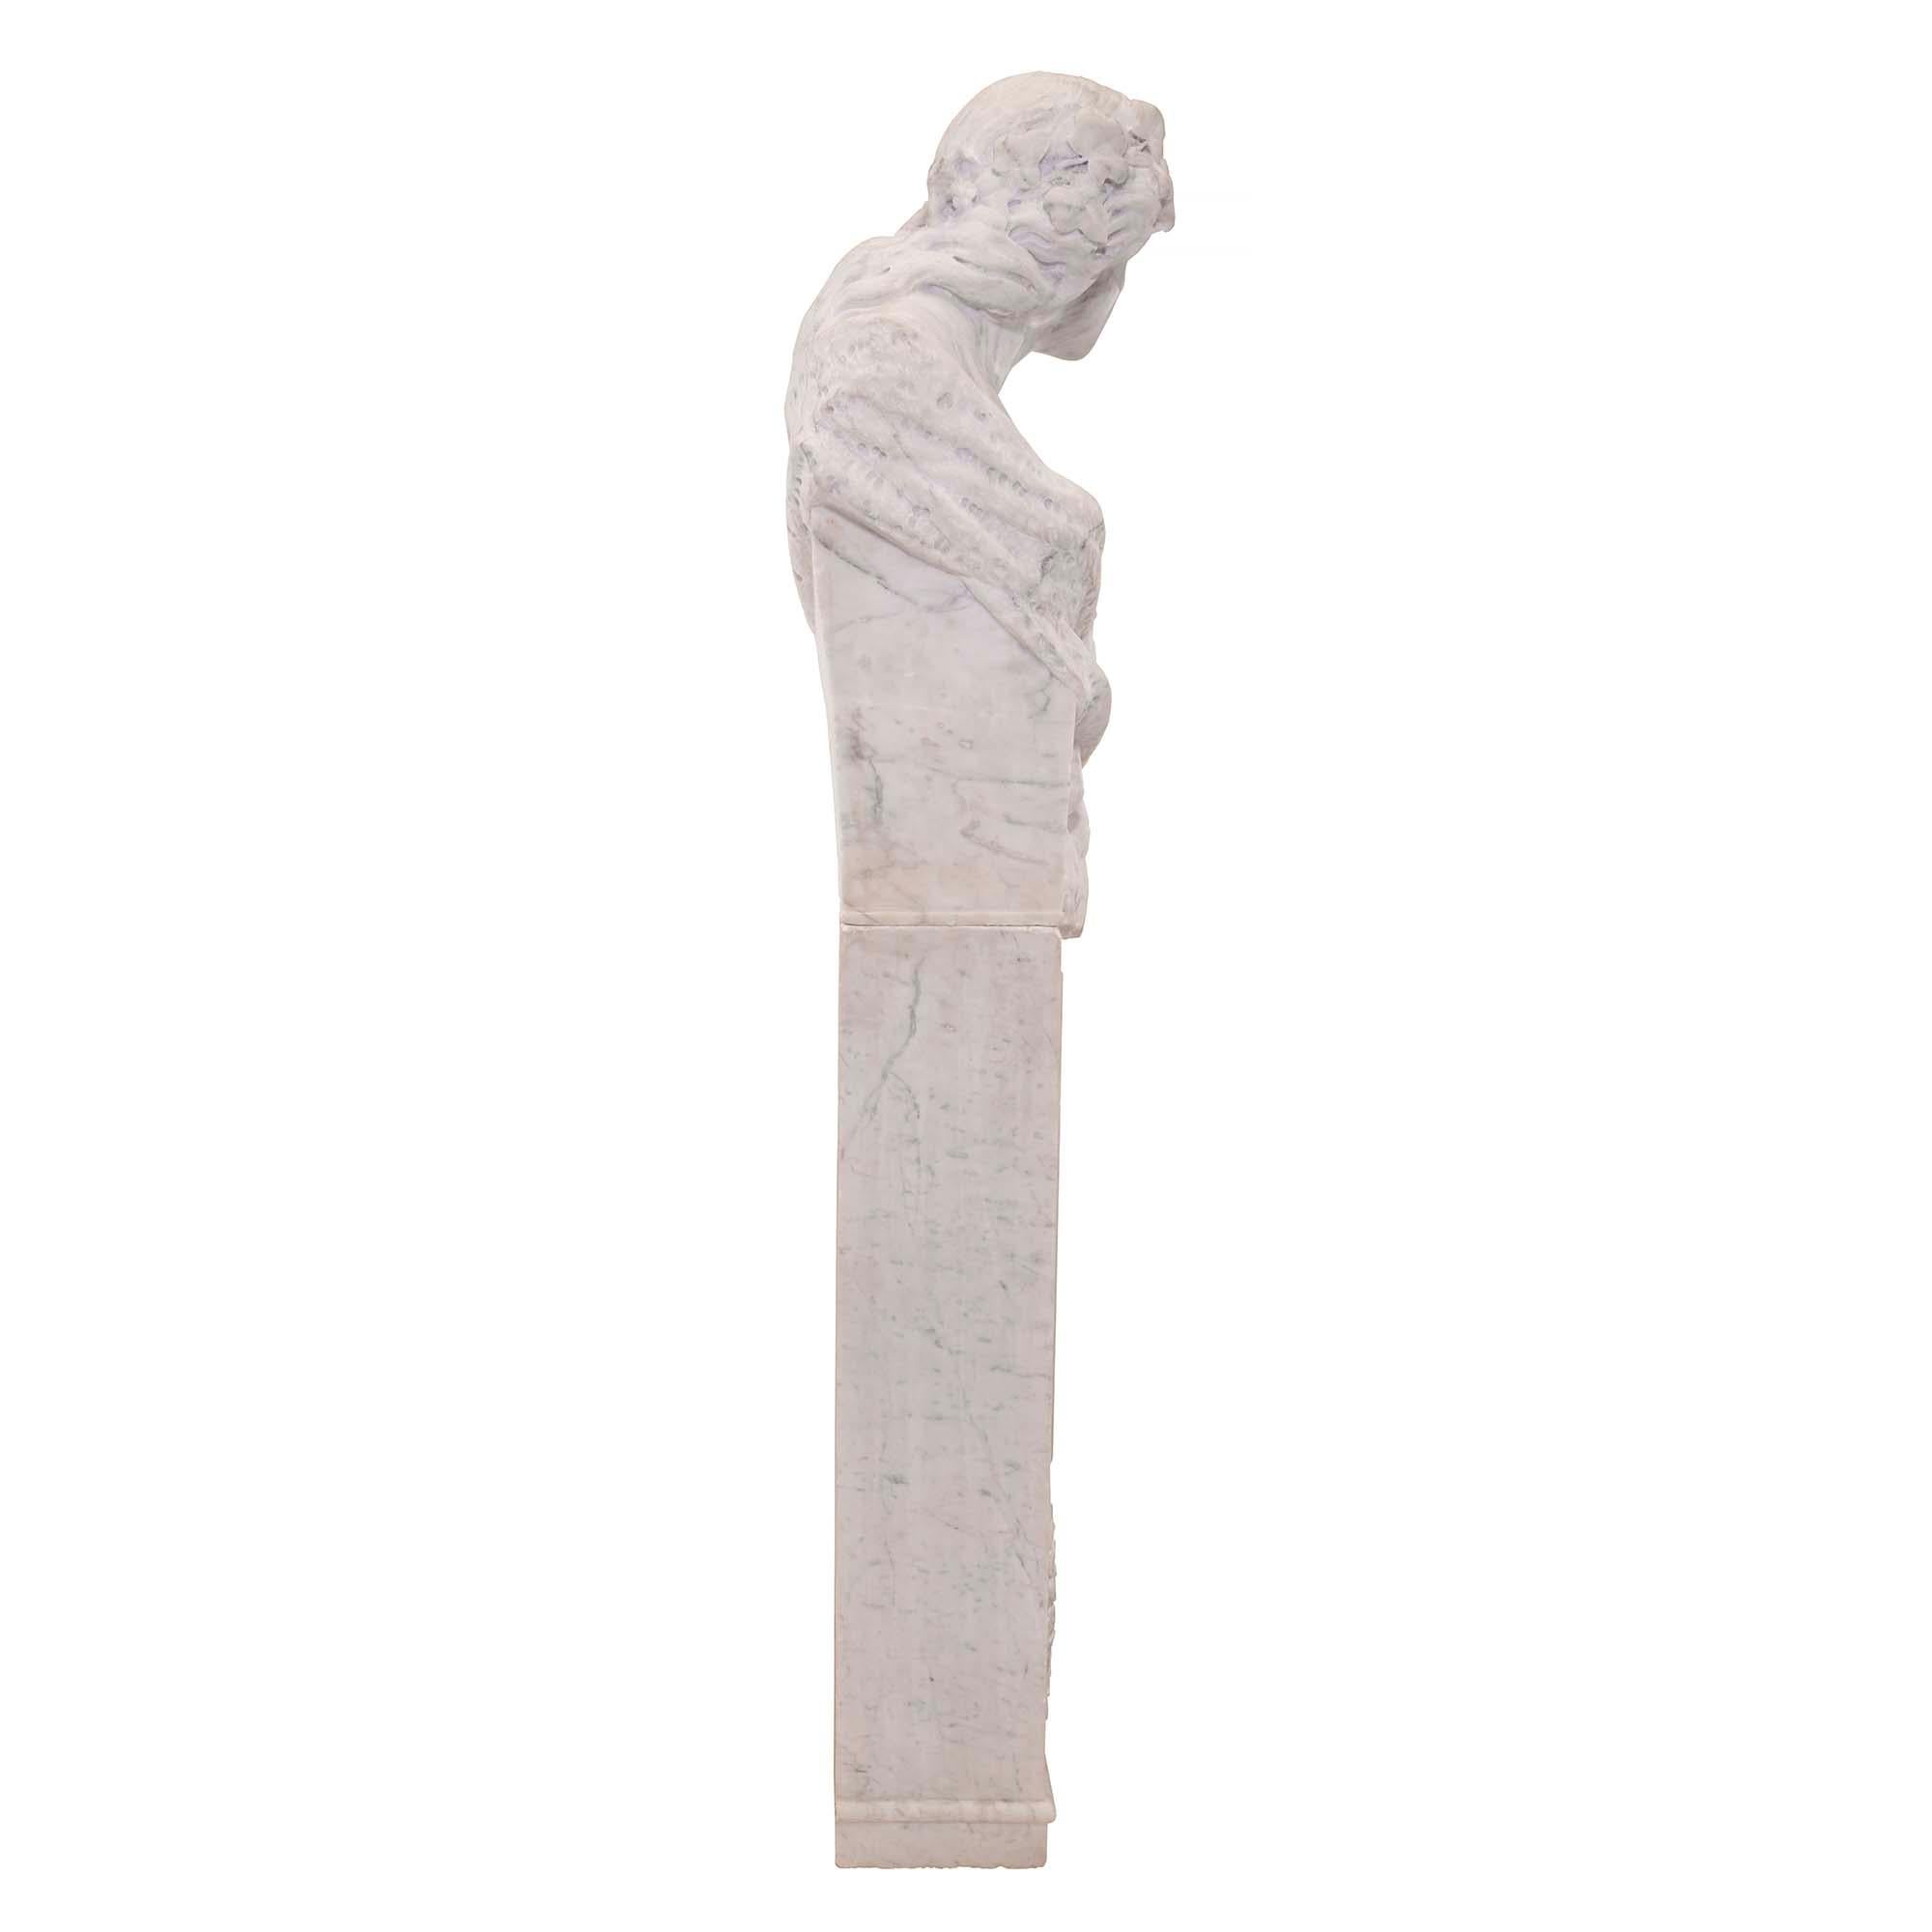 A very decorative Italian 19th century white Carrara marble freestanding statue of a Garden Maiden. The statue is raised by a rectangular marble pedestal with a richly carved floral wreath and a tied bow below a mottled raised panel. The upper